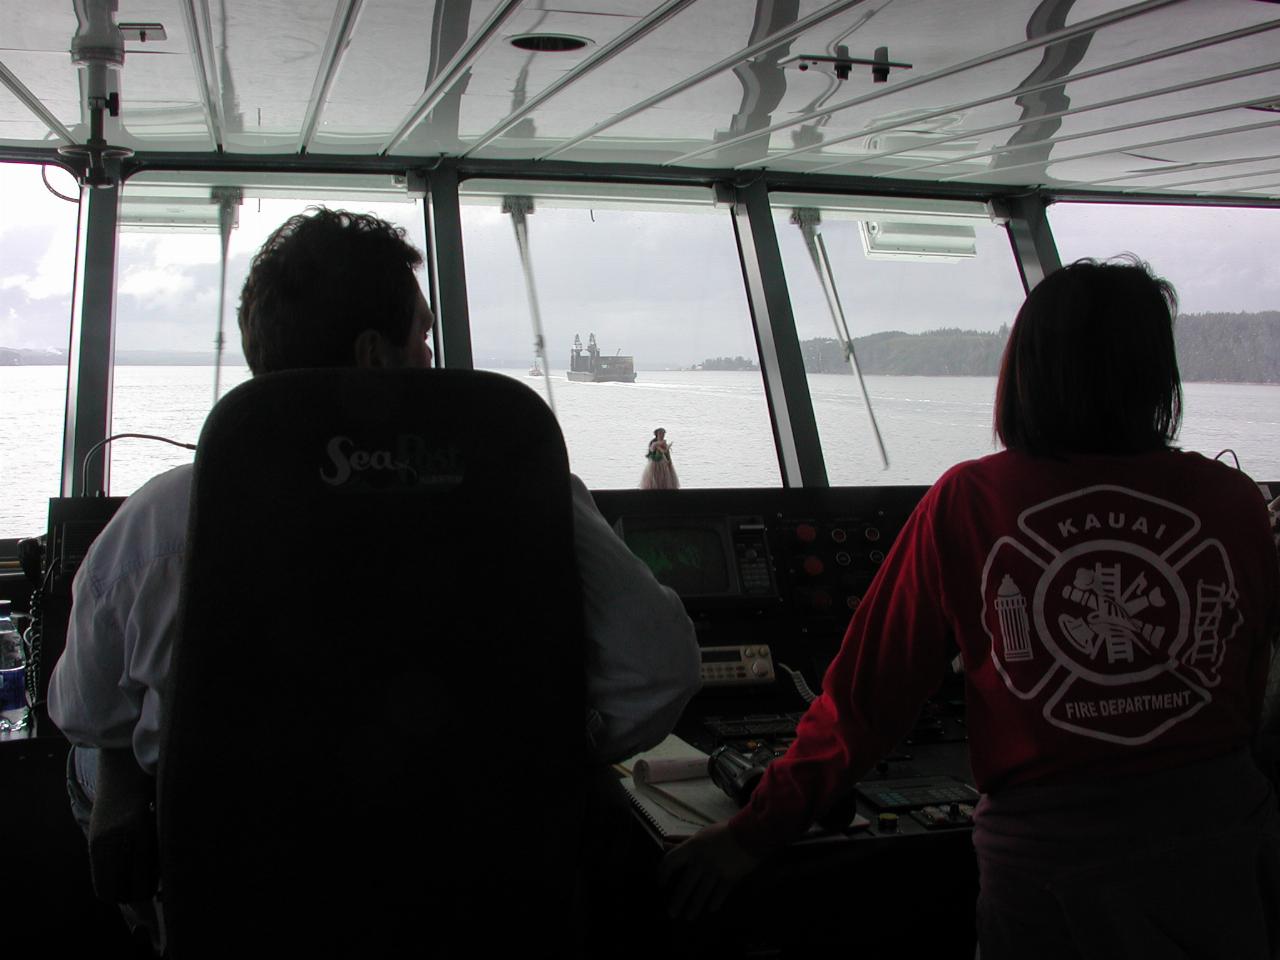 Approaching another vessel to pass, near Port McNeil